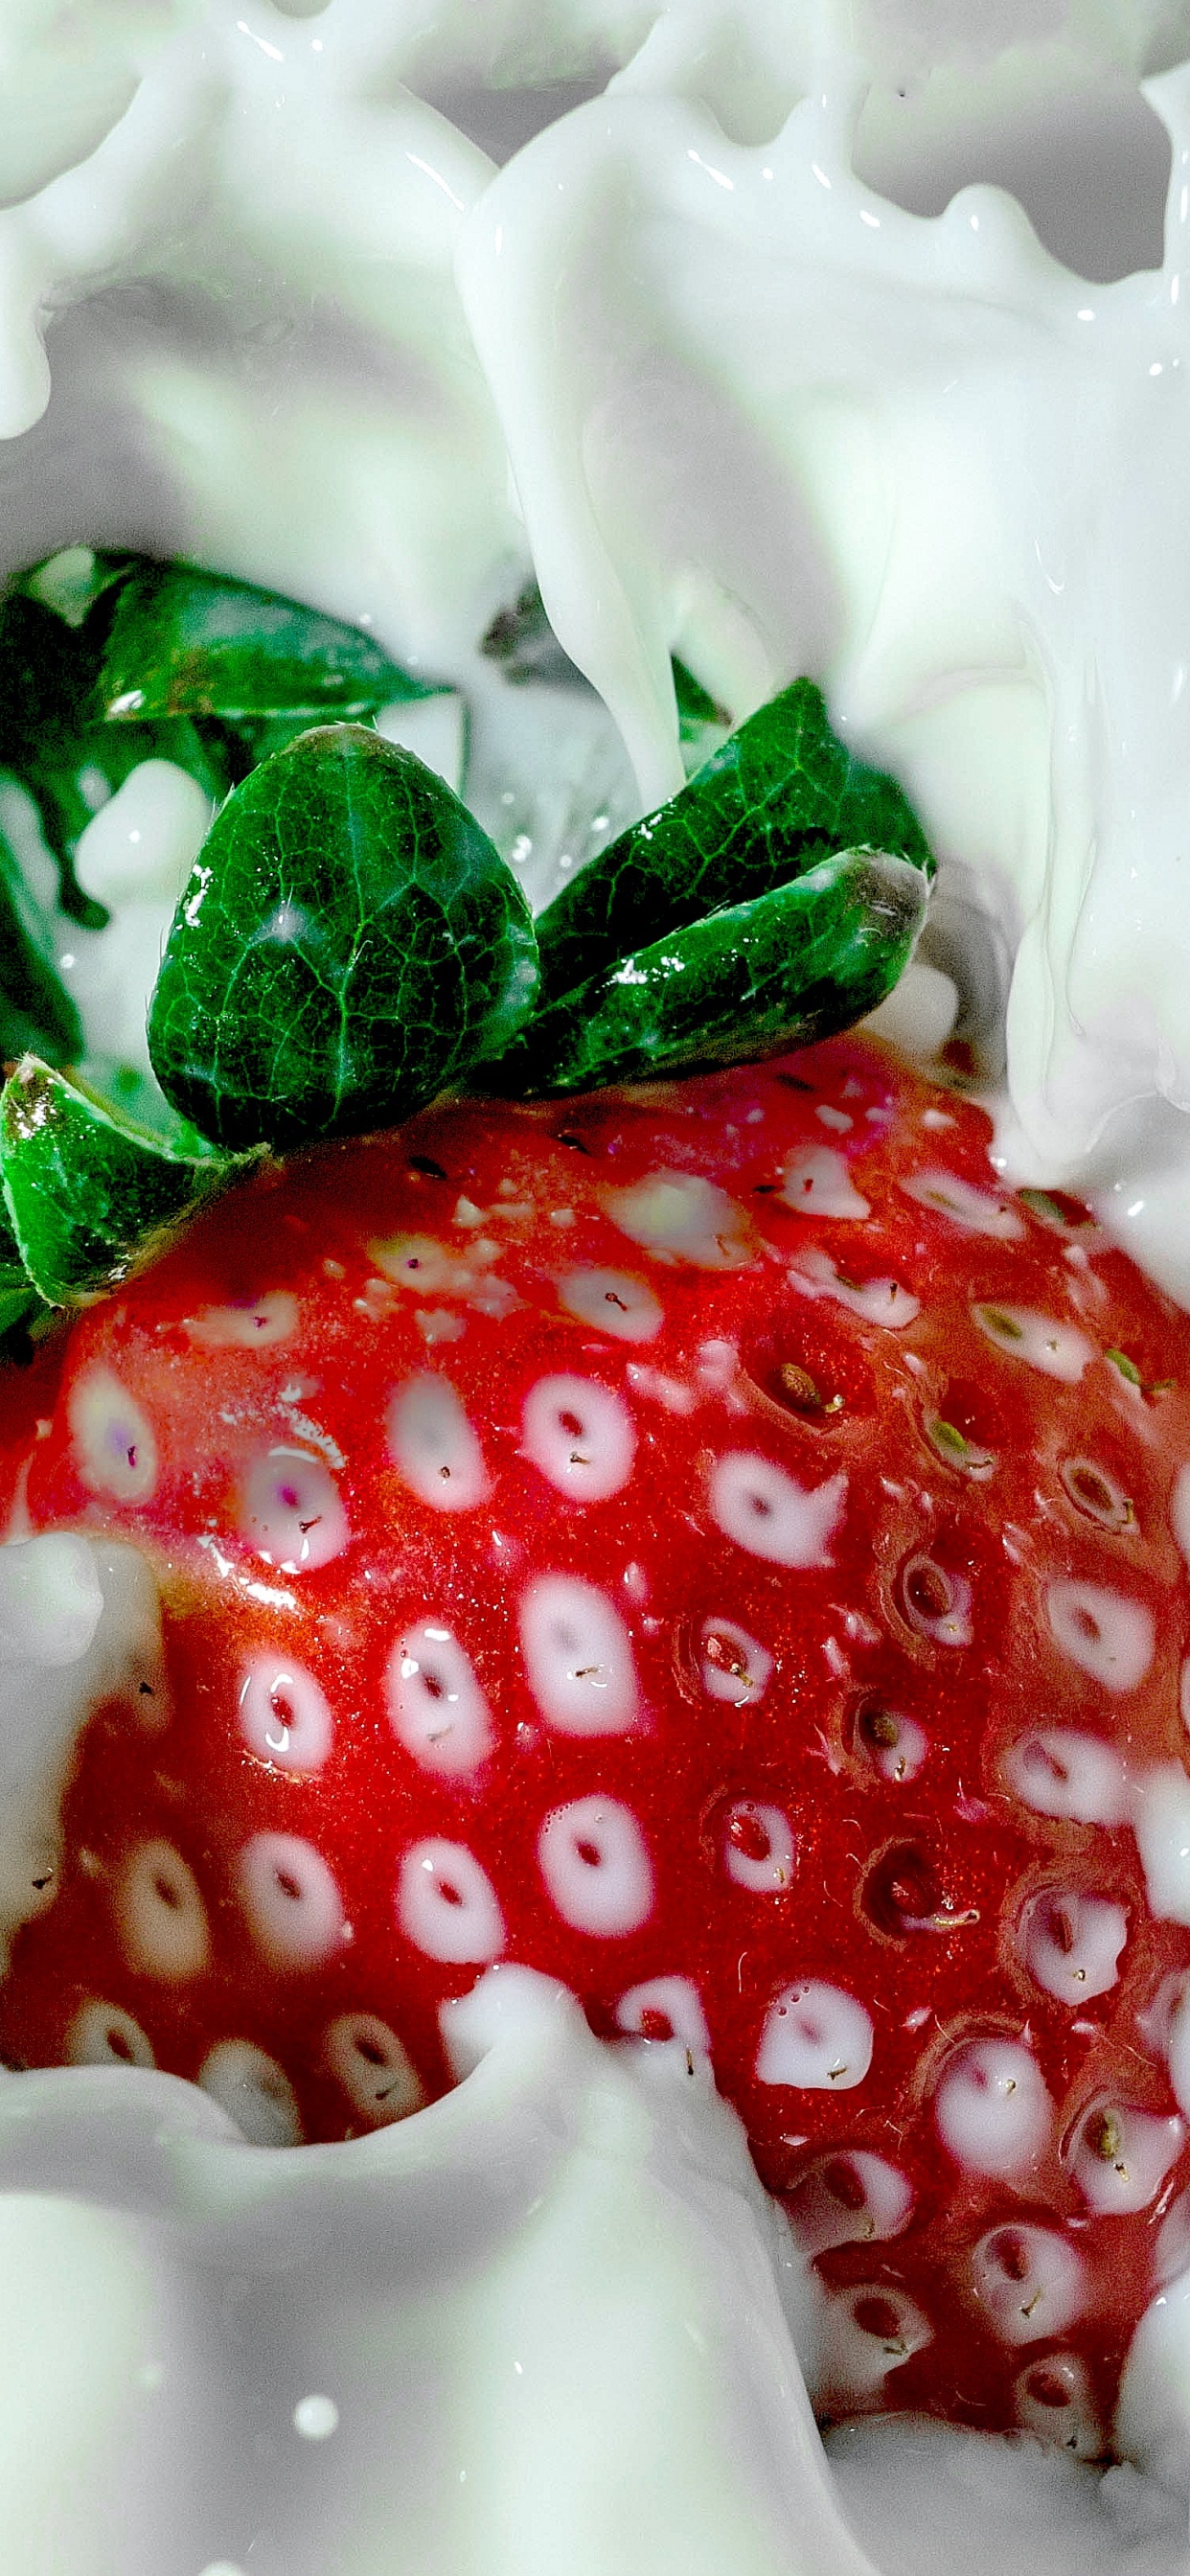 Strawberry on White Ceramic Plate. Wallpaper in 1242x2688 Resolution